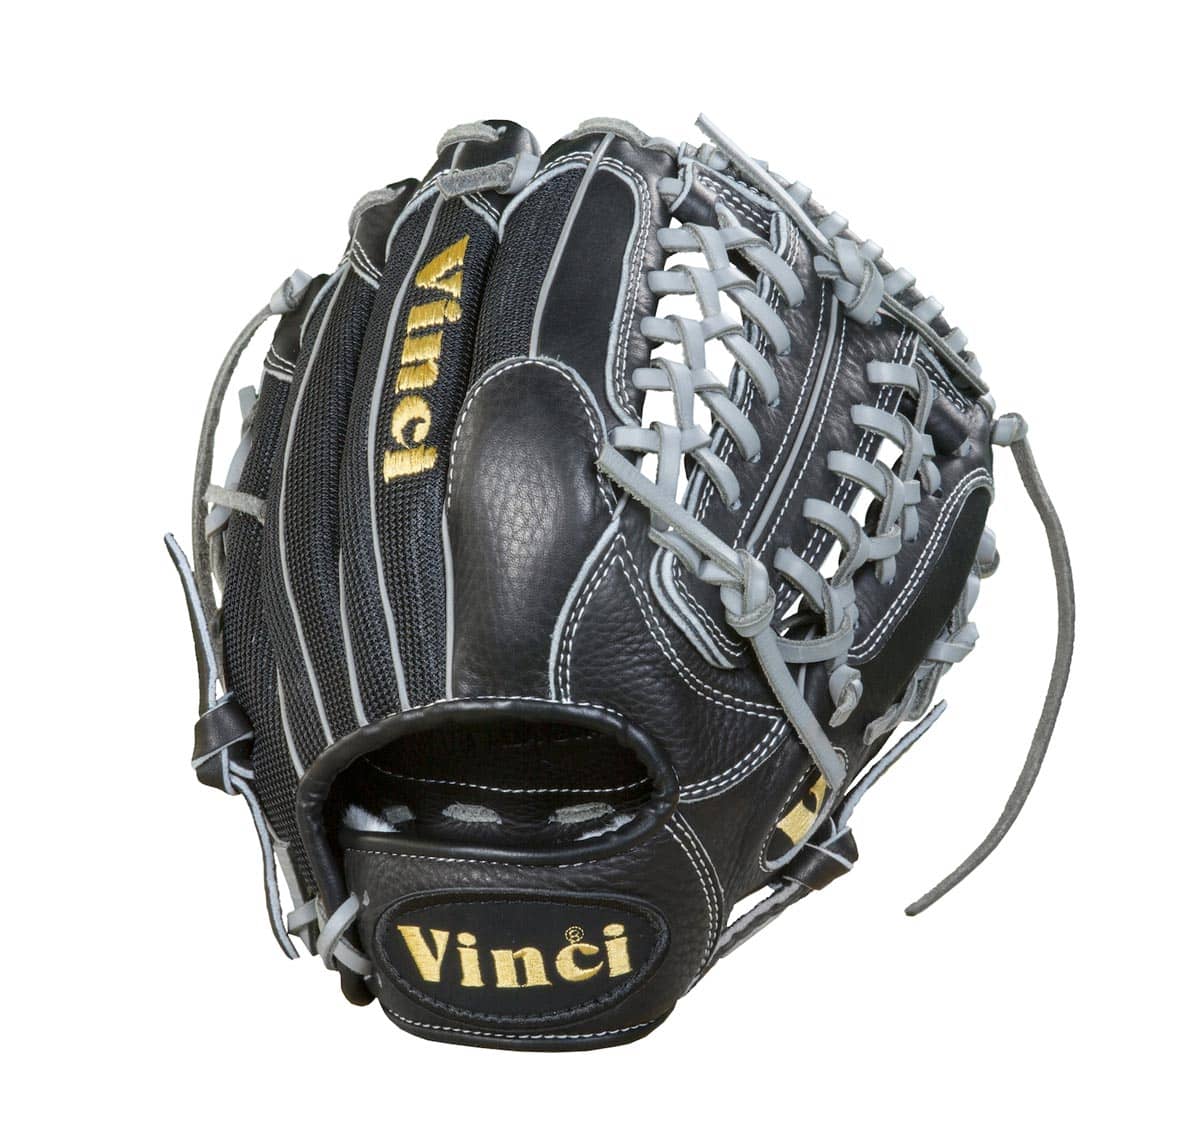 11.5 inch Baseball Glove-JC3333-22 with Black Mesh Back, Grey Lace and Grey  Welting